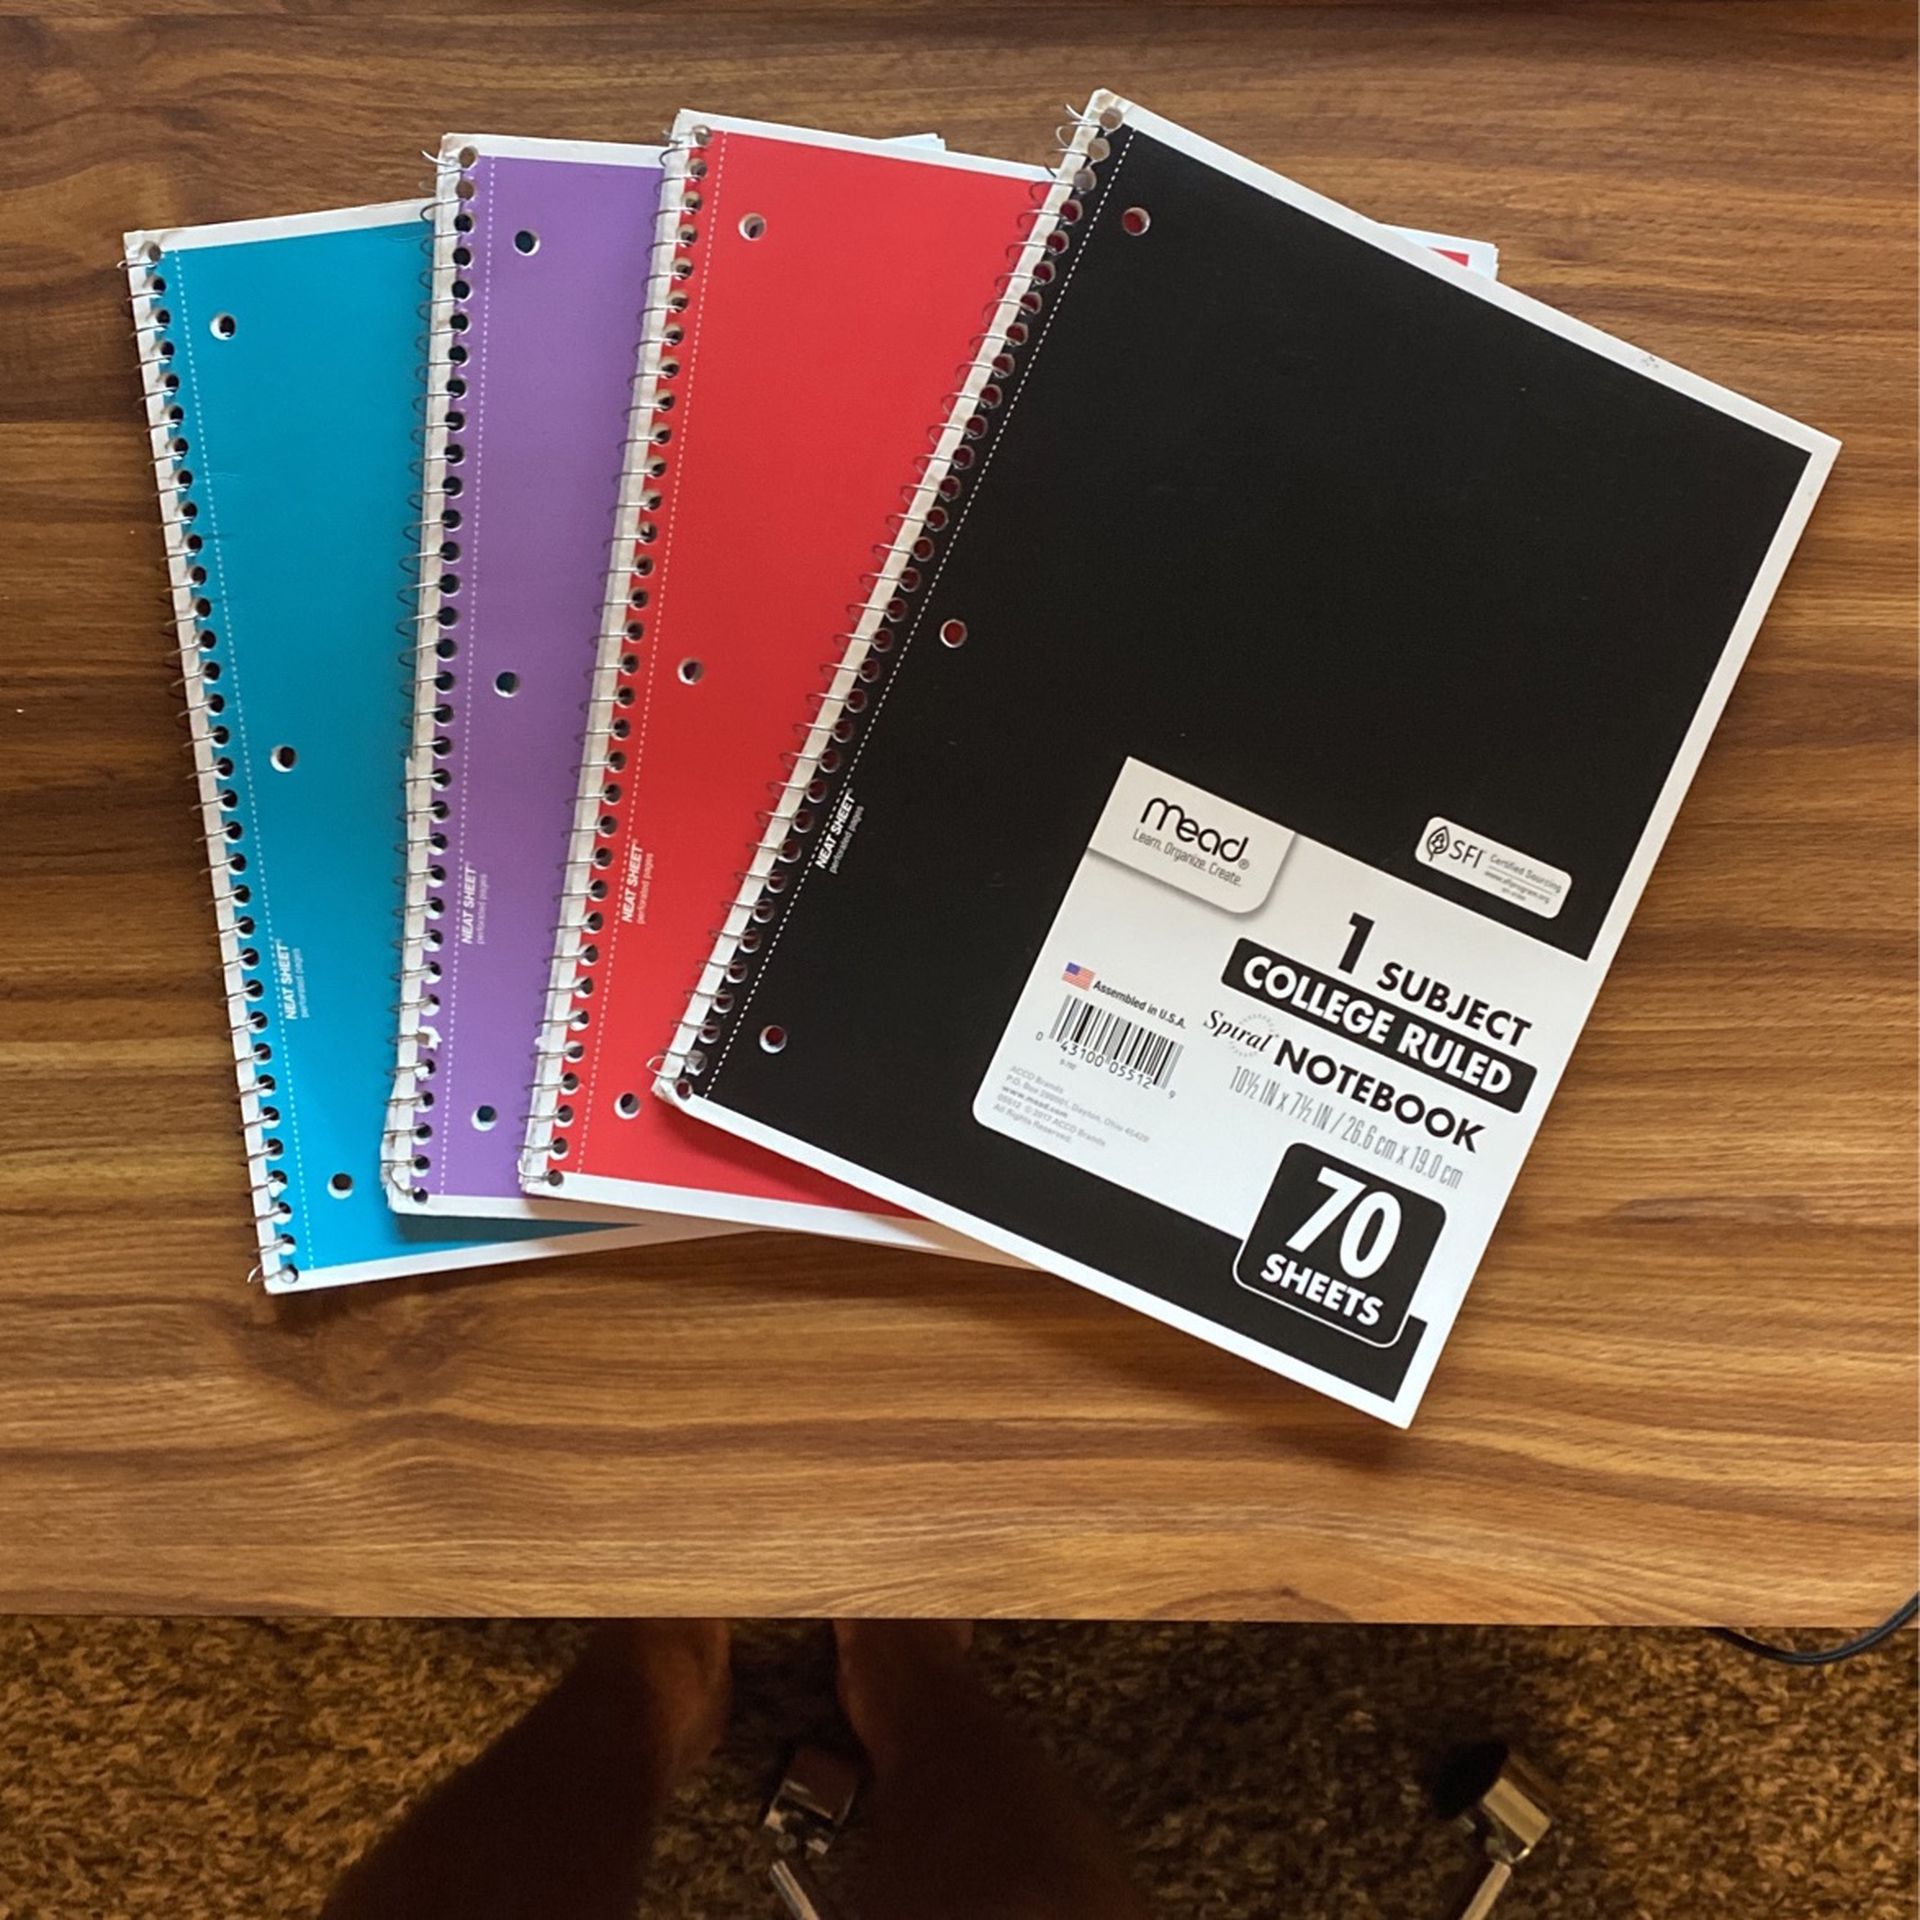 Free 70 Sheet College Ruled Notebooks